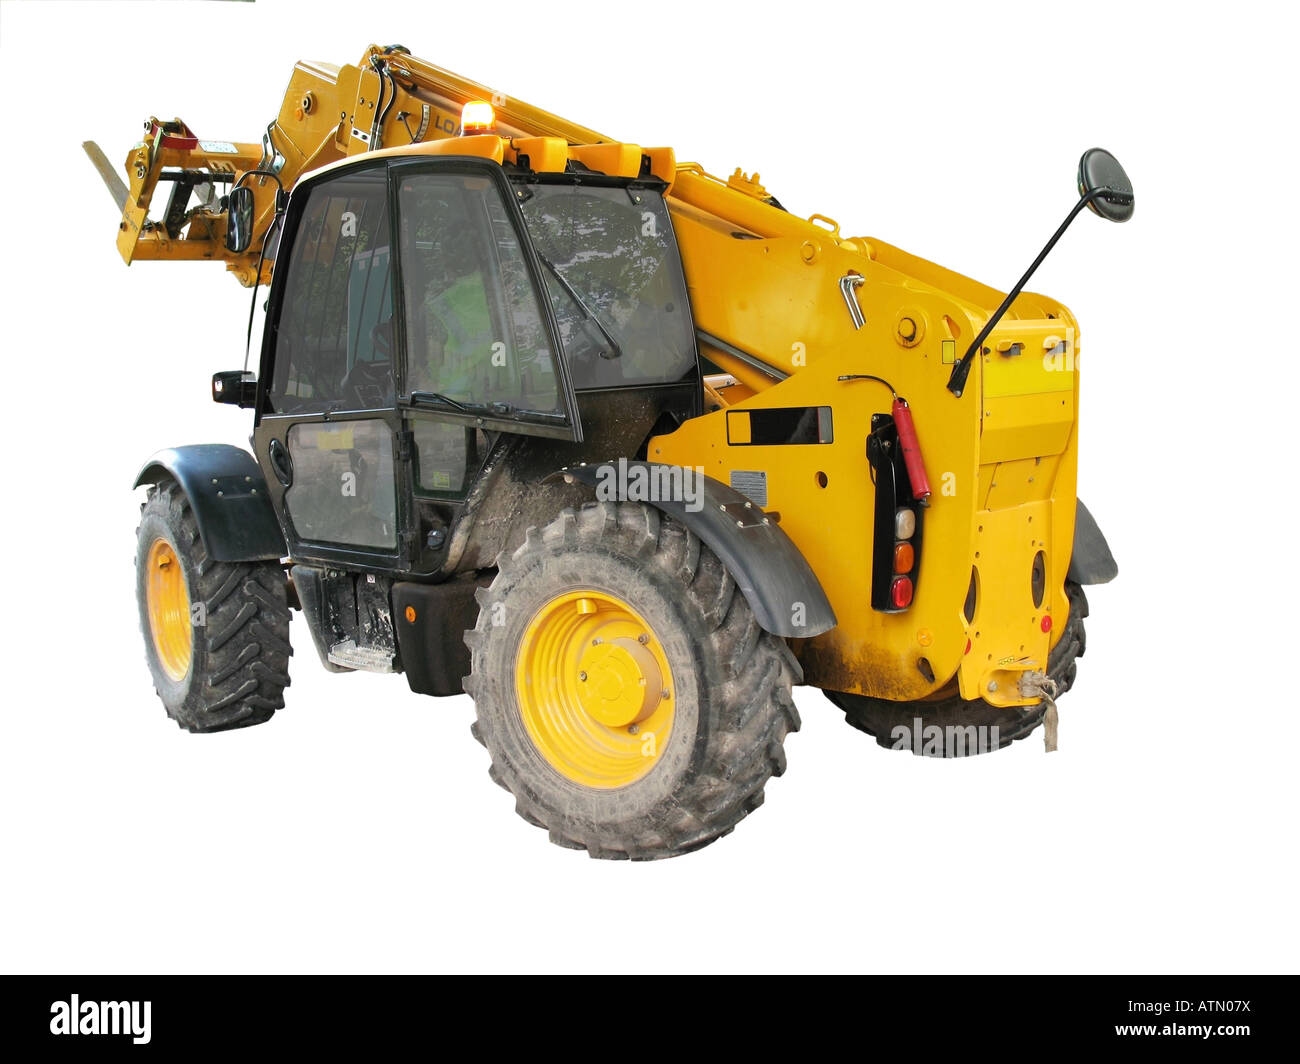 Isolated construction vehicle seen from a rear angle Stock Photo